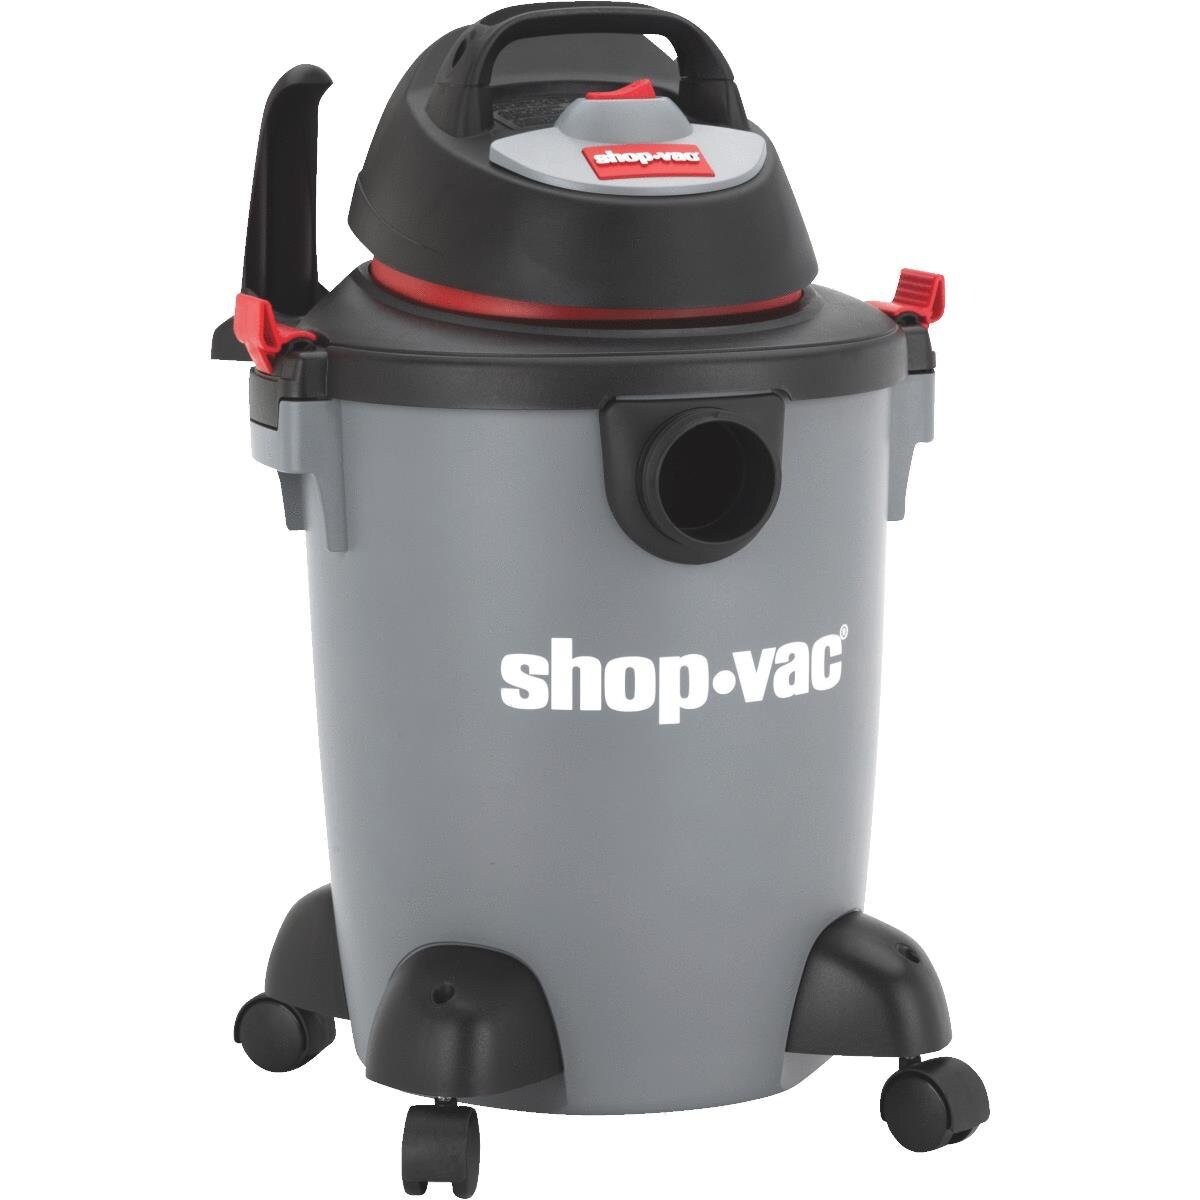 Shop-Vac 6-Gallons 3-HP Corded Wet/Dry Shop Vacuum with Accessories  Included at